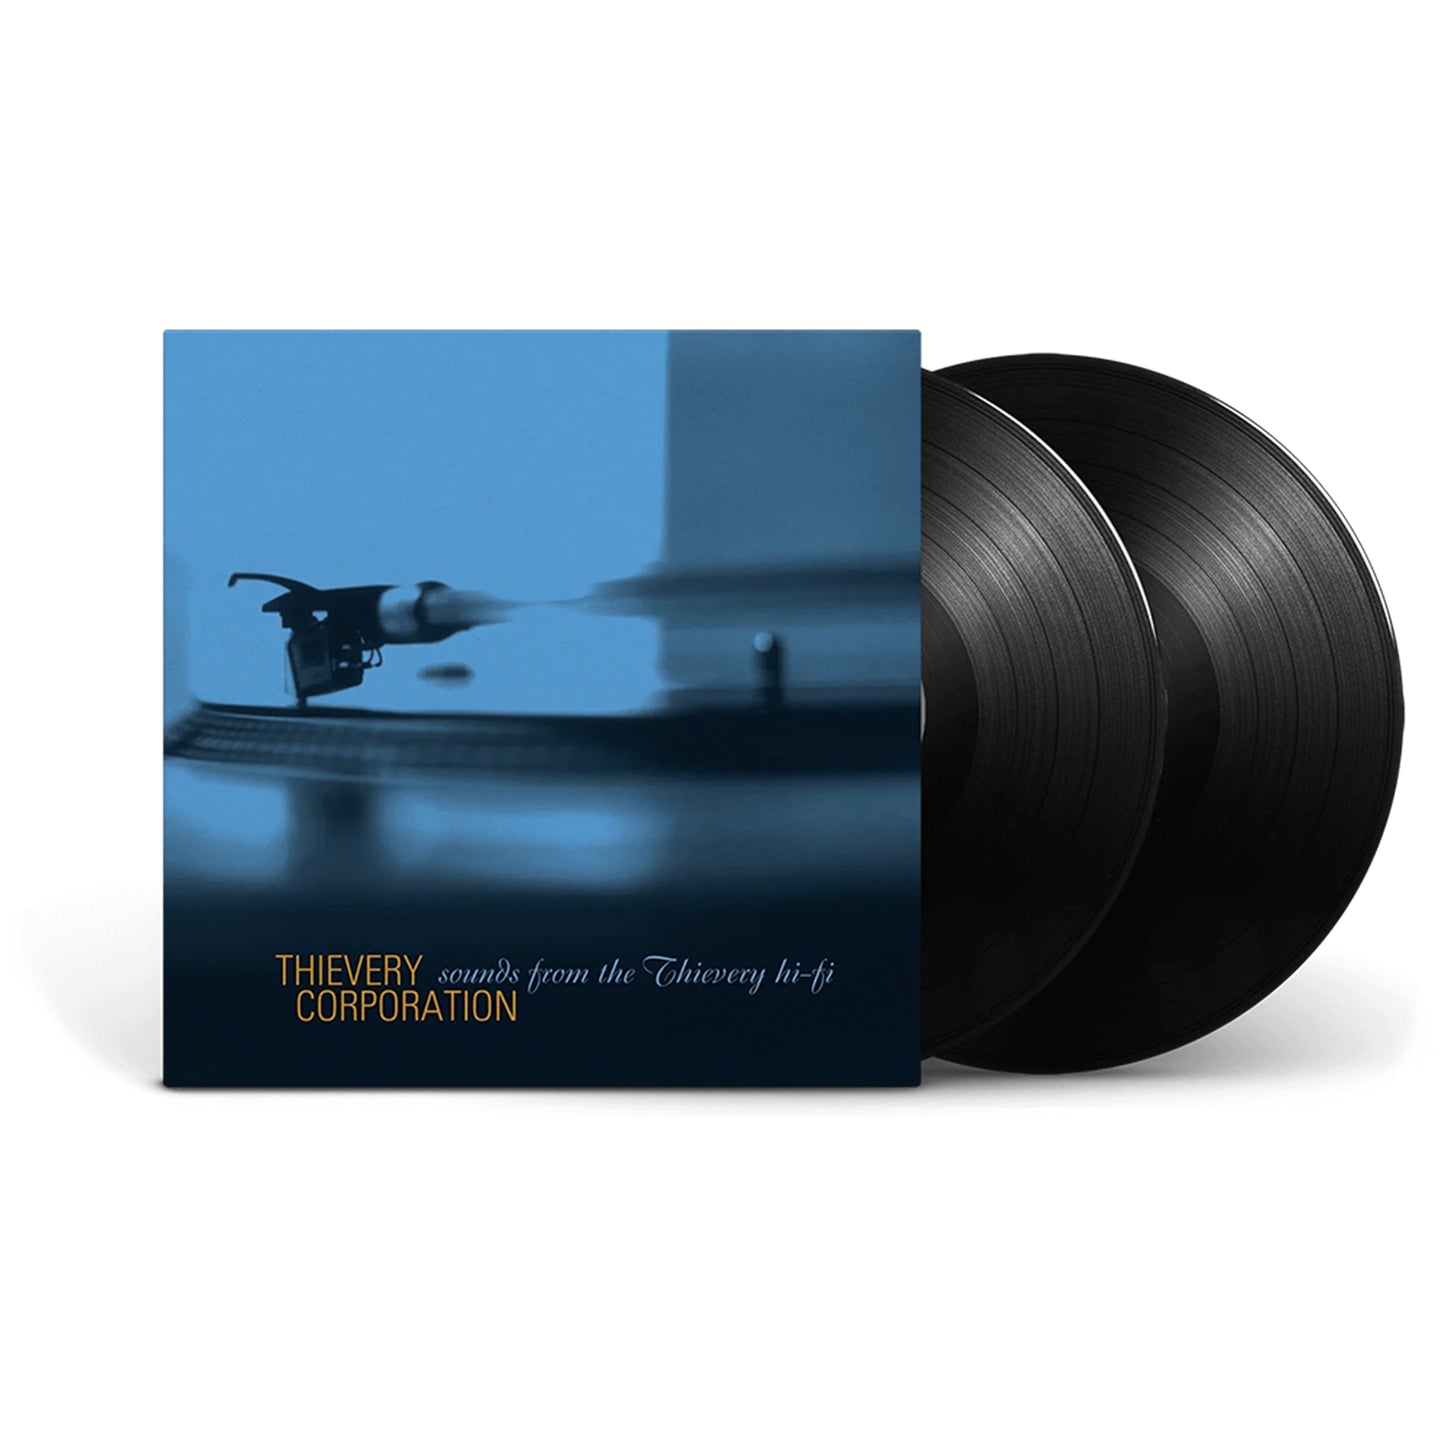 Sounds From The Thievery Hi-Fi (25th Anniversary 2X LP)